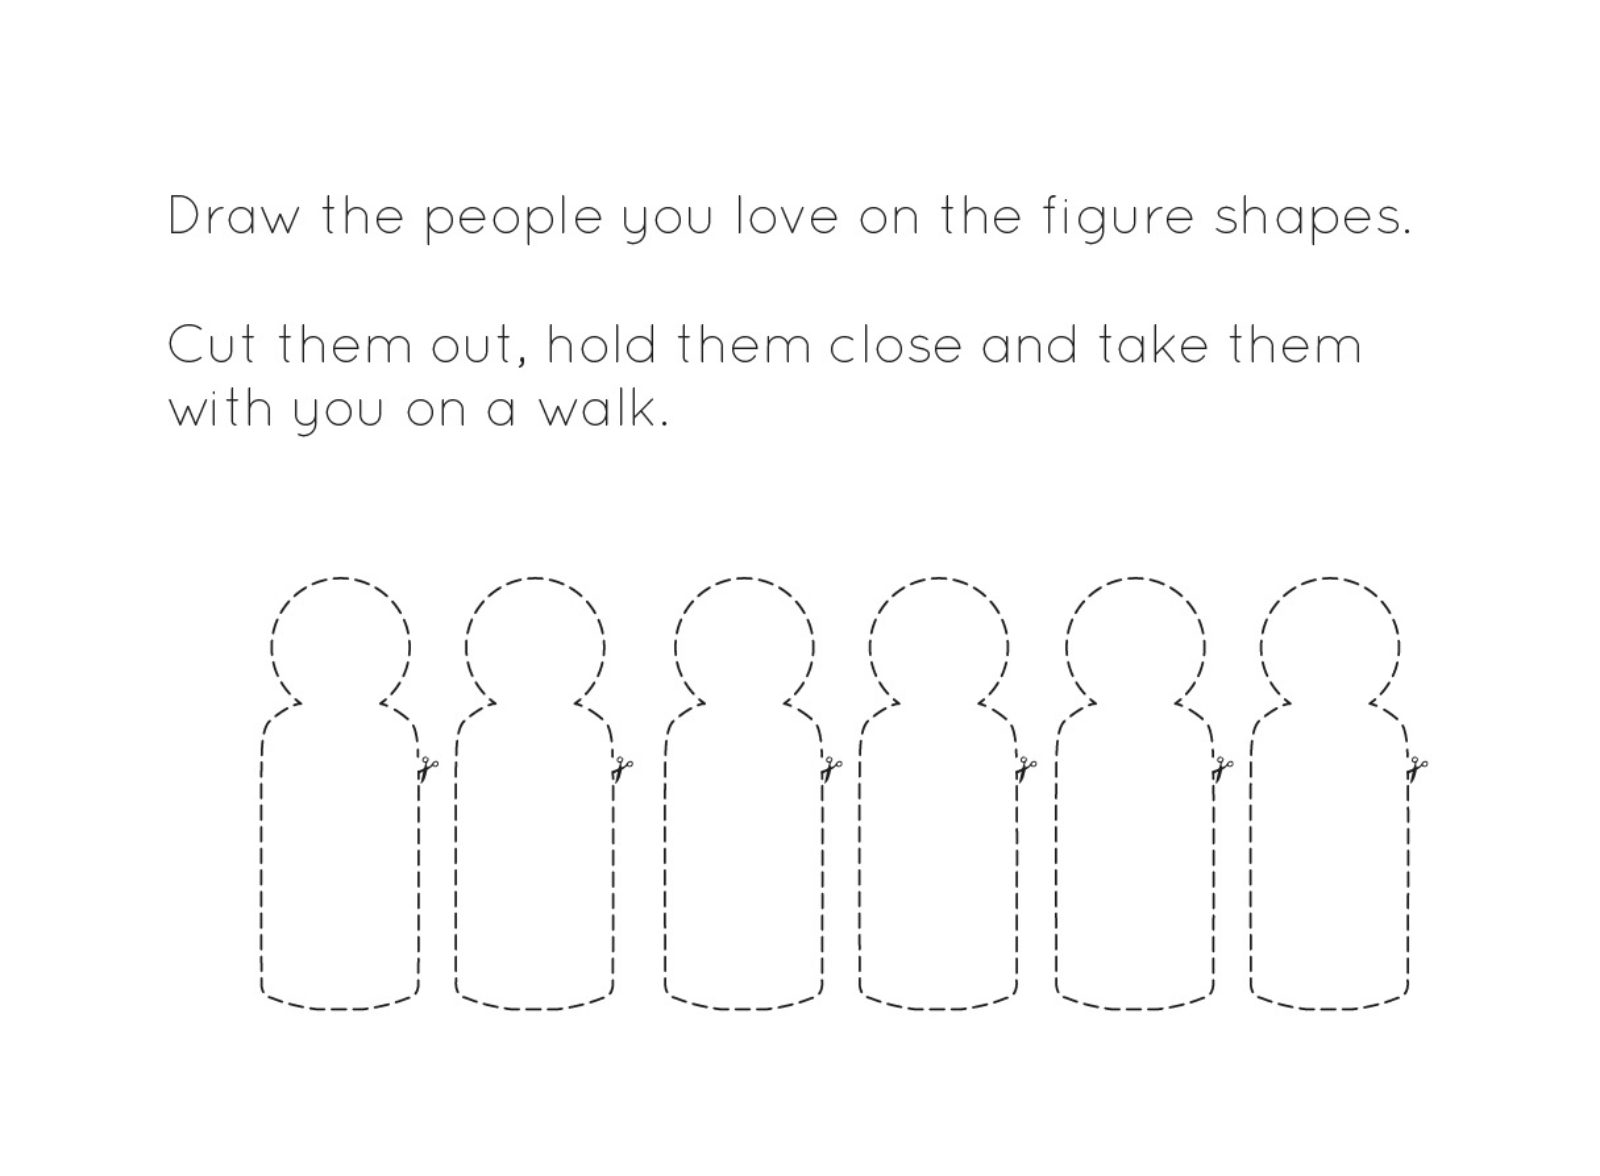 Instructions on how to make a paper cut out of the people you love, so you can take them out on a walk with you.